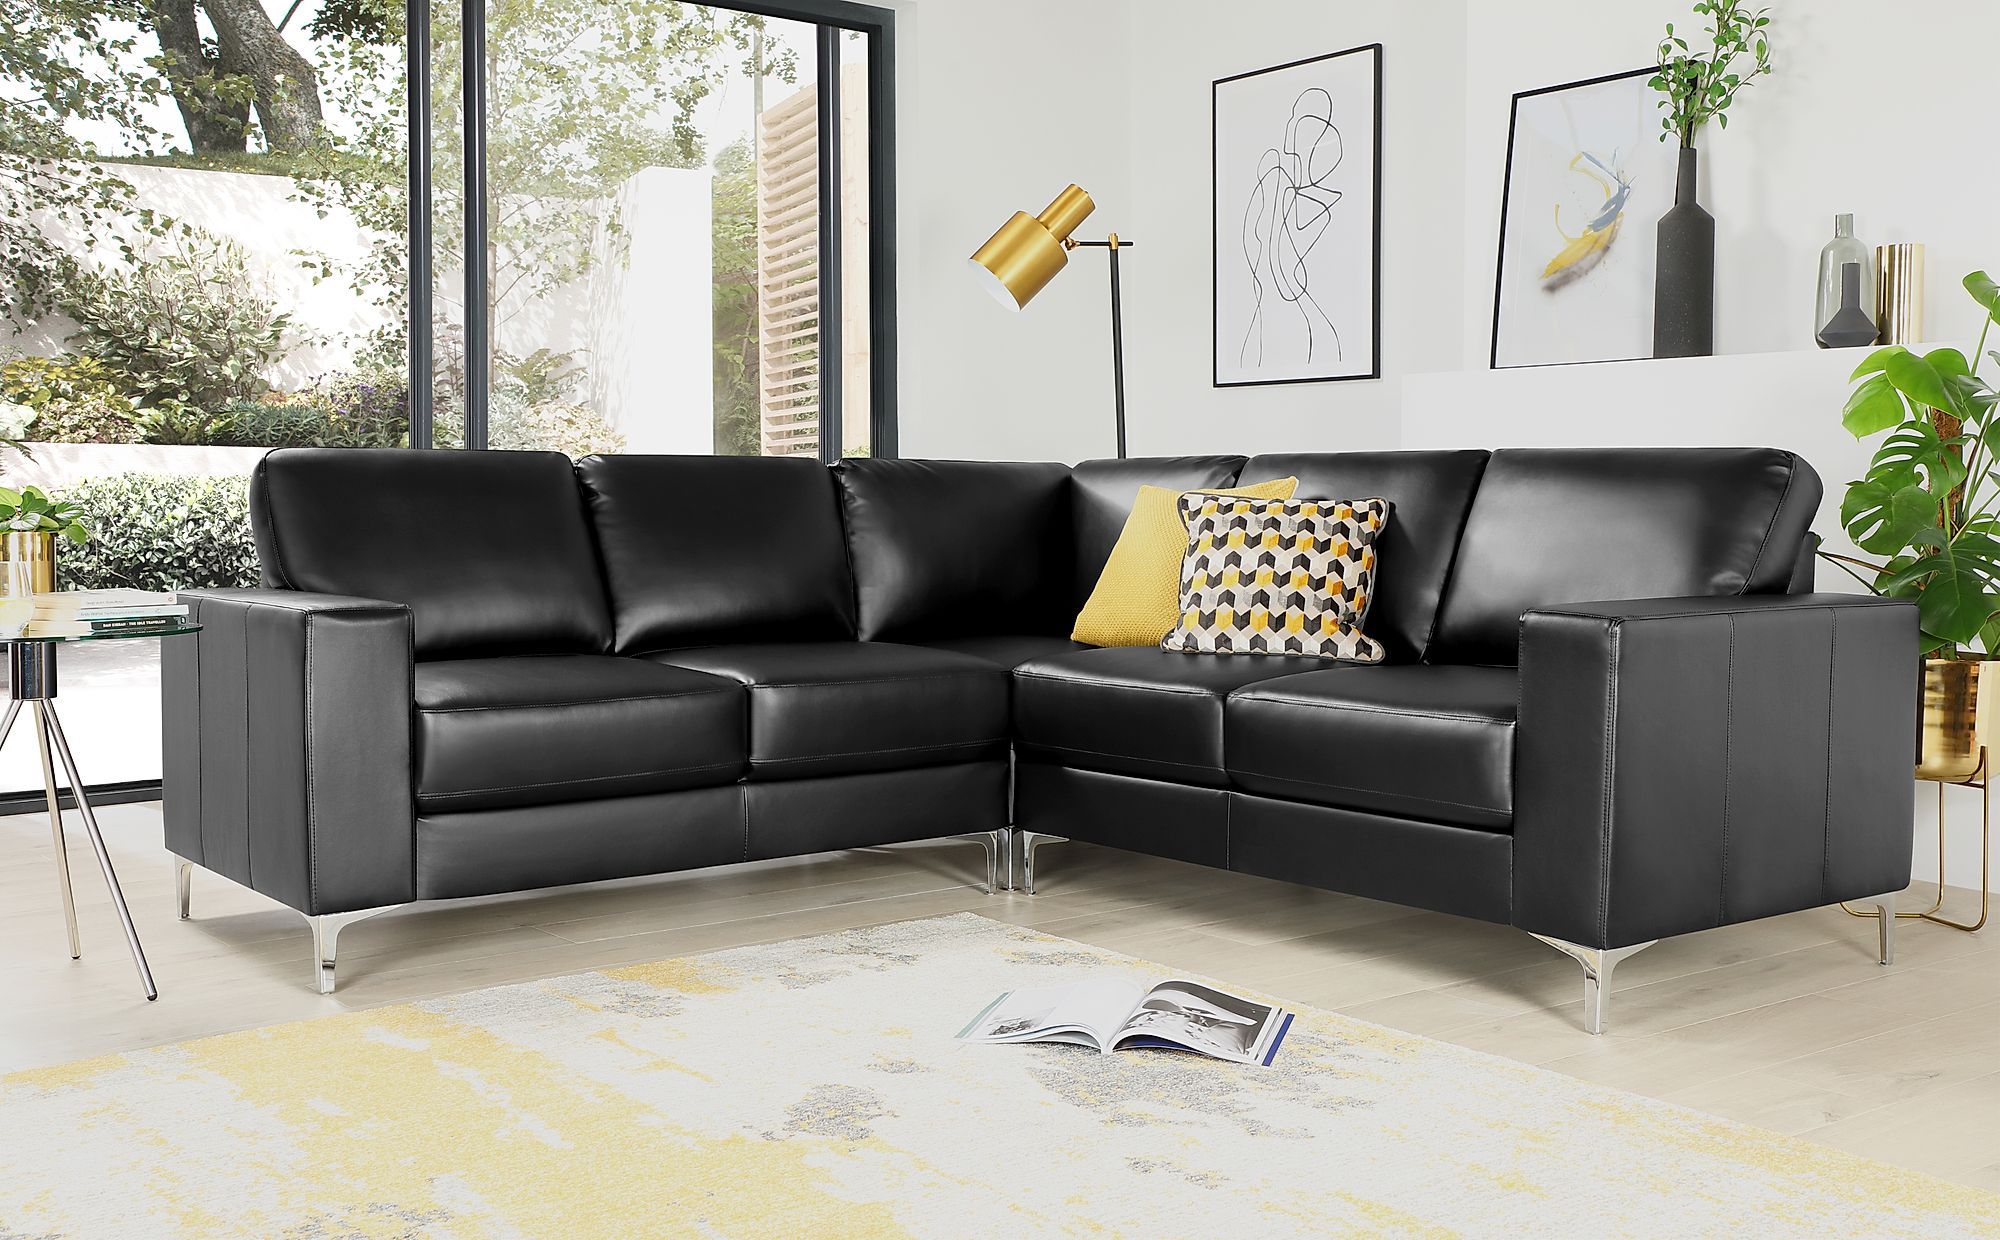 Baltimore Black Leather Corner Sofa | Furniture Choice For Sofas In Black (View 16 of 20)